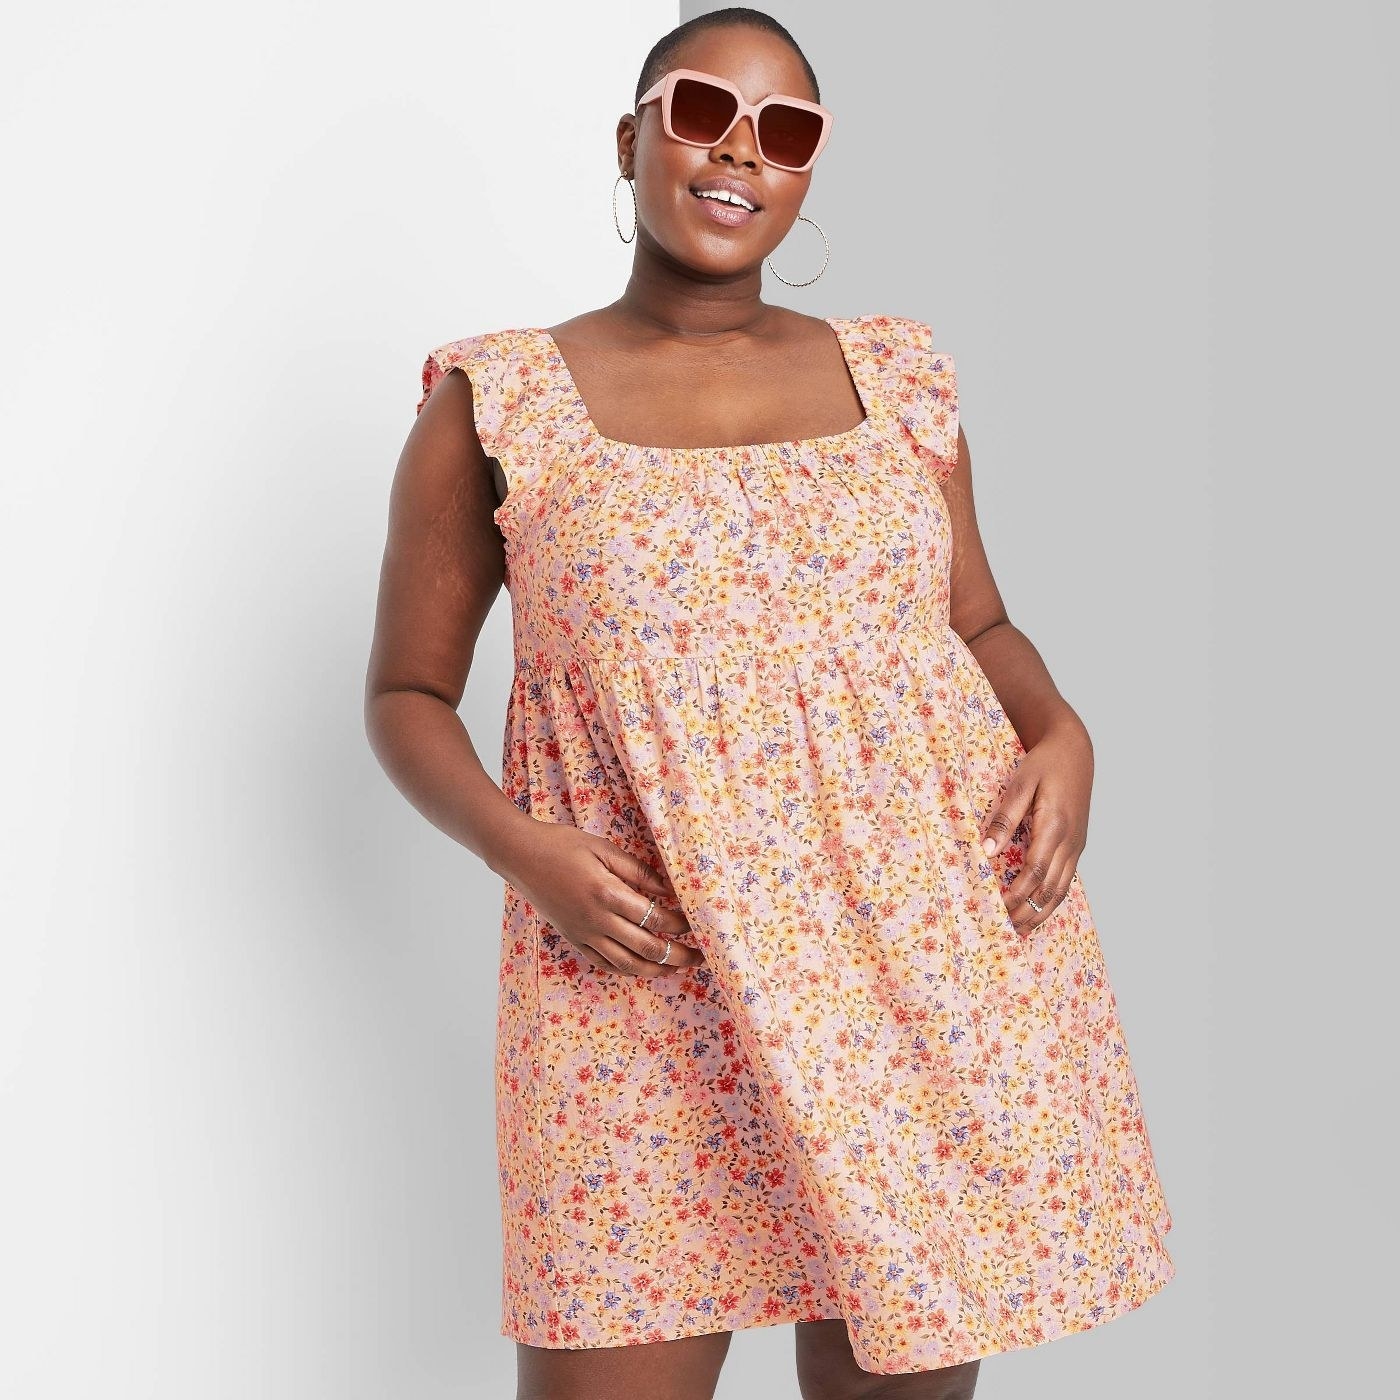 10 Editor-Loved Target Spring Dress Deals to Shop Now, Starting at $20